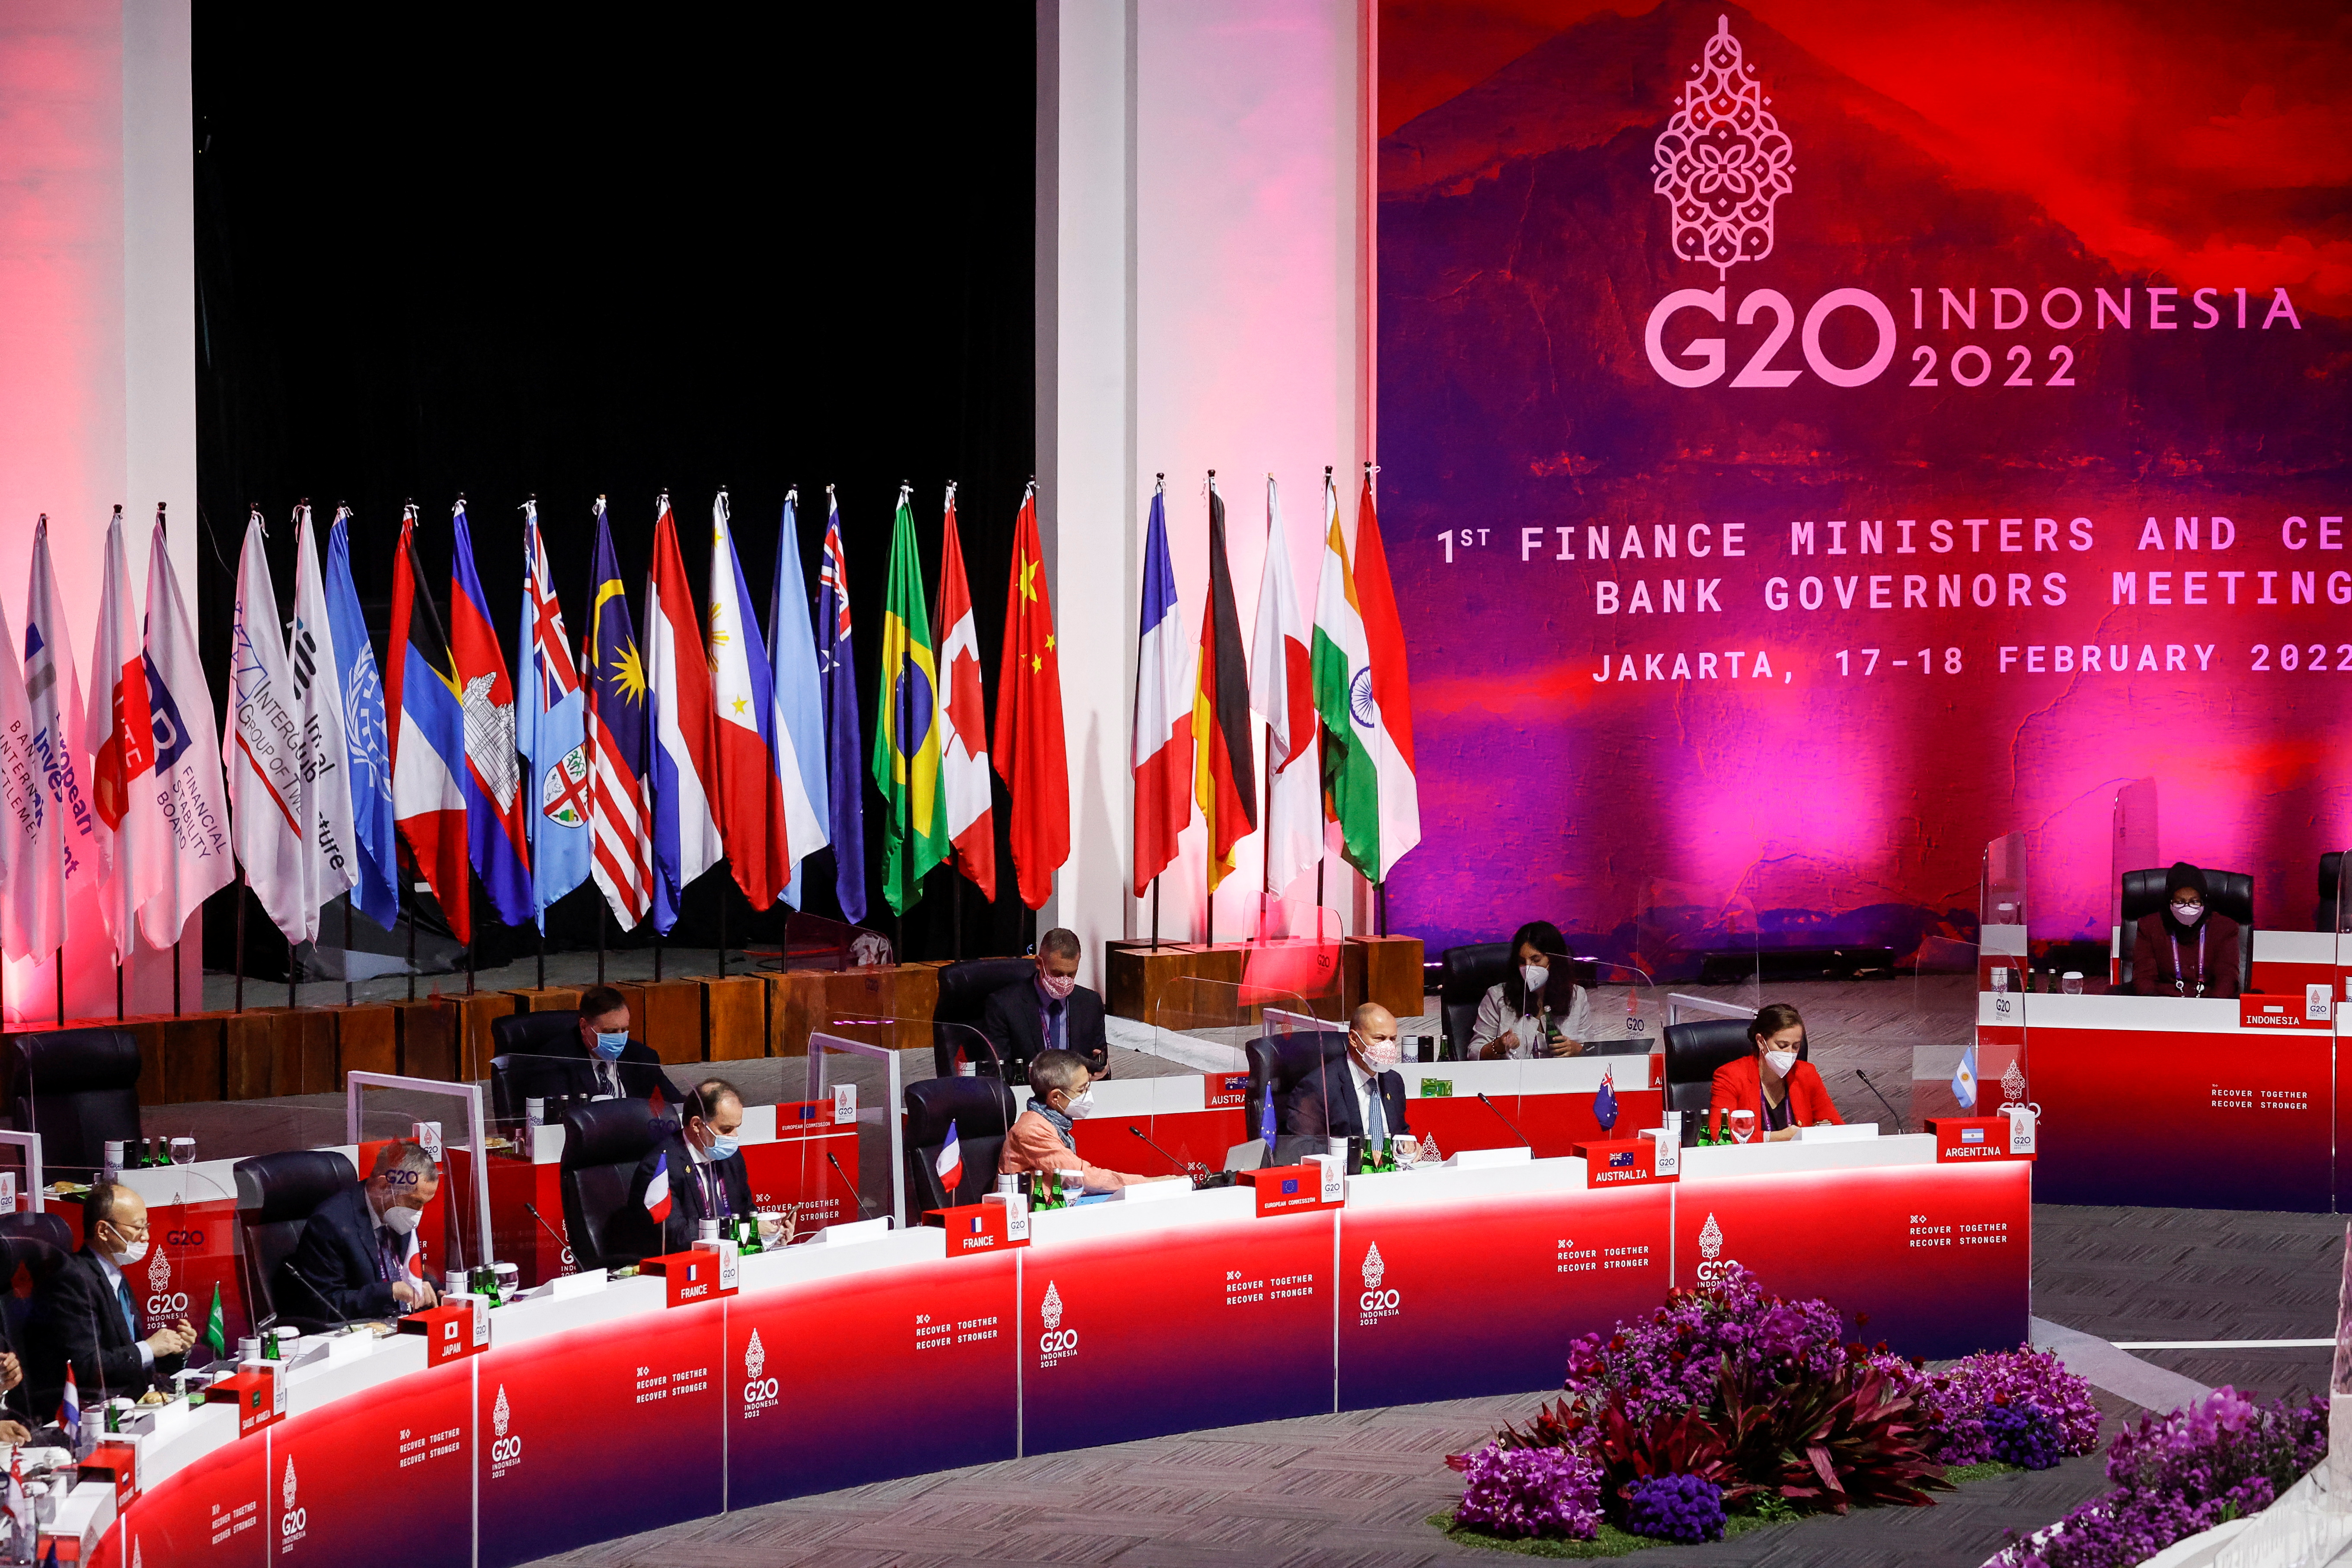 A general view of the opening ceremony of the G20 finance ministers and central bank governors meeting in Jakarta